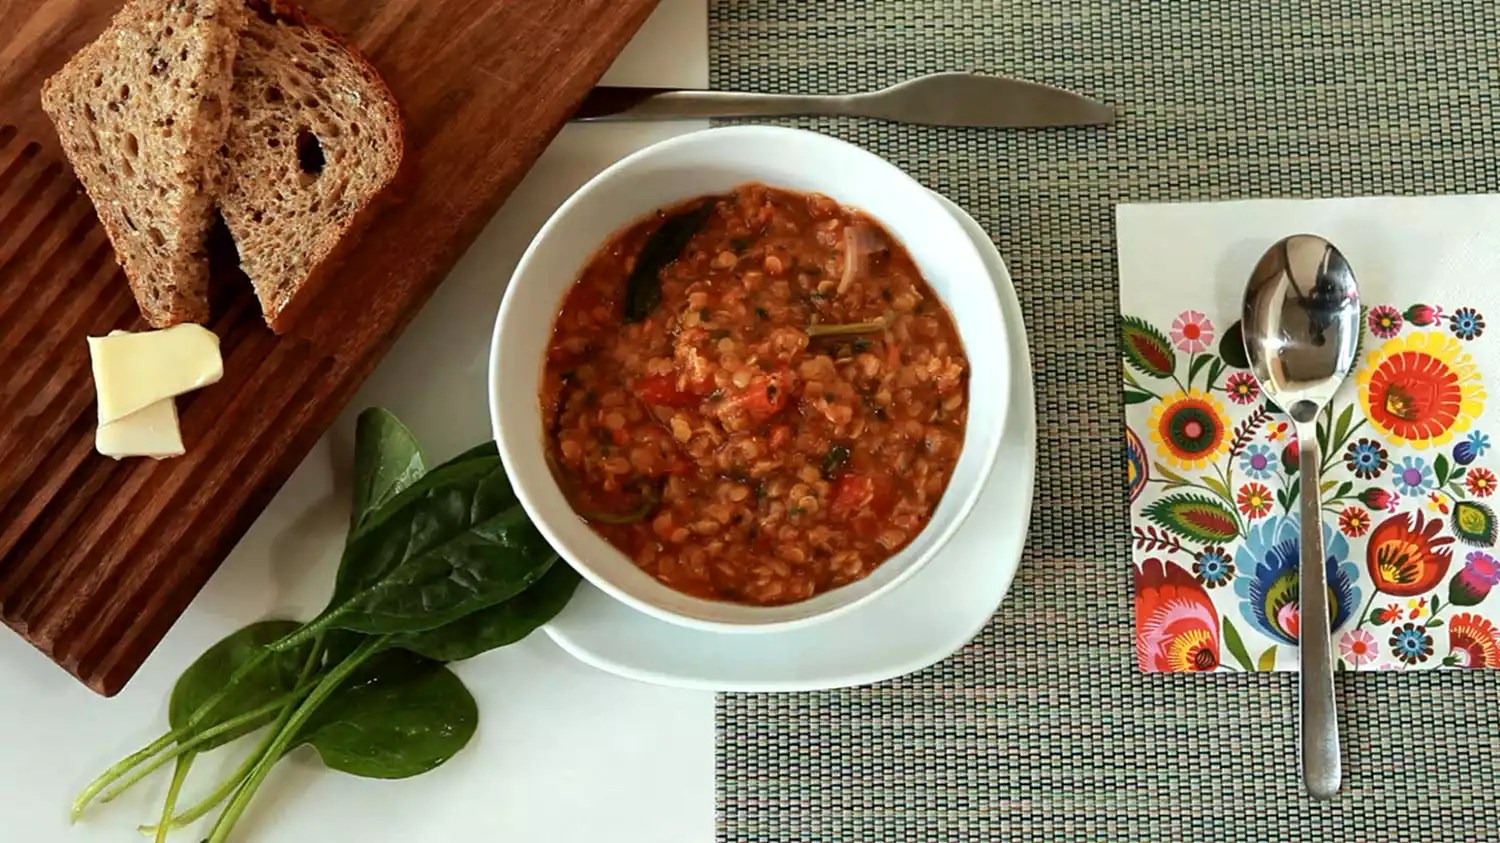 Spice Up Your Meals with Bryan’s Lentil Soup